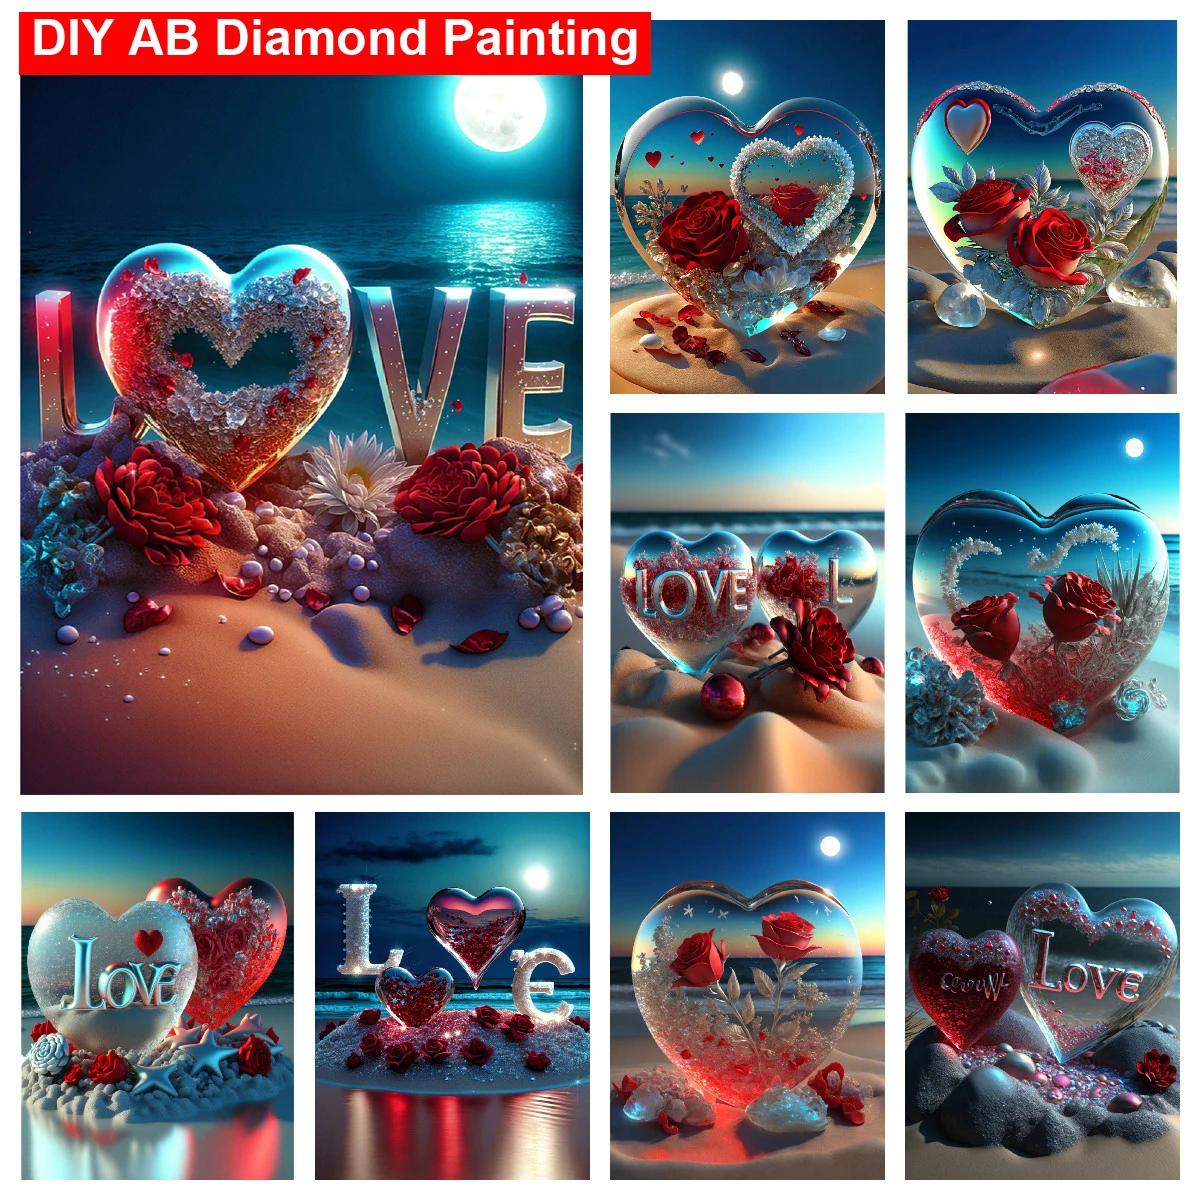 Valentines Day Gifts for Women Her,5D DIY Christmas Gift Full Drill Diamond  Painting Home Wall Decor Rhinestone for Valentines Day Decor Wedding